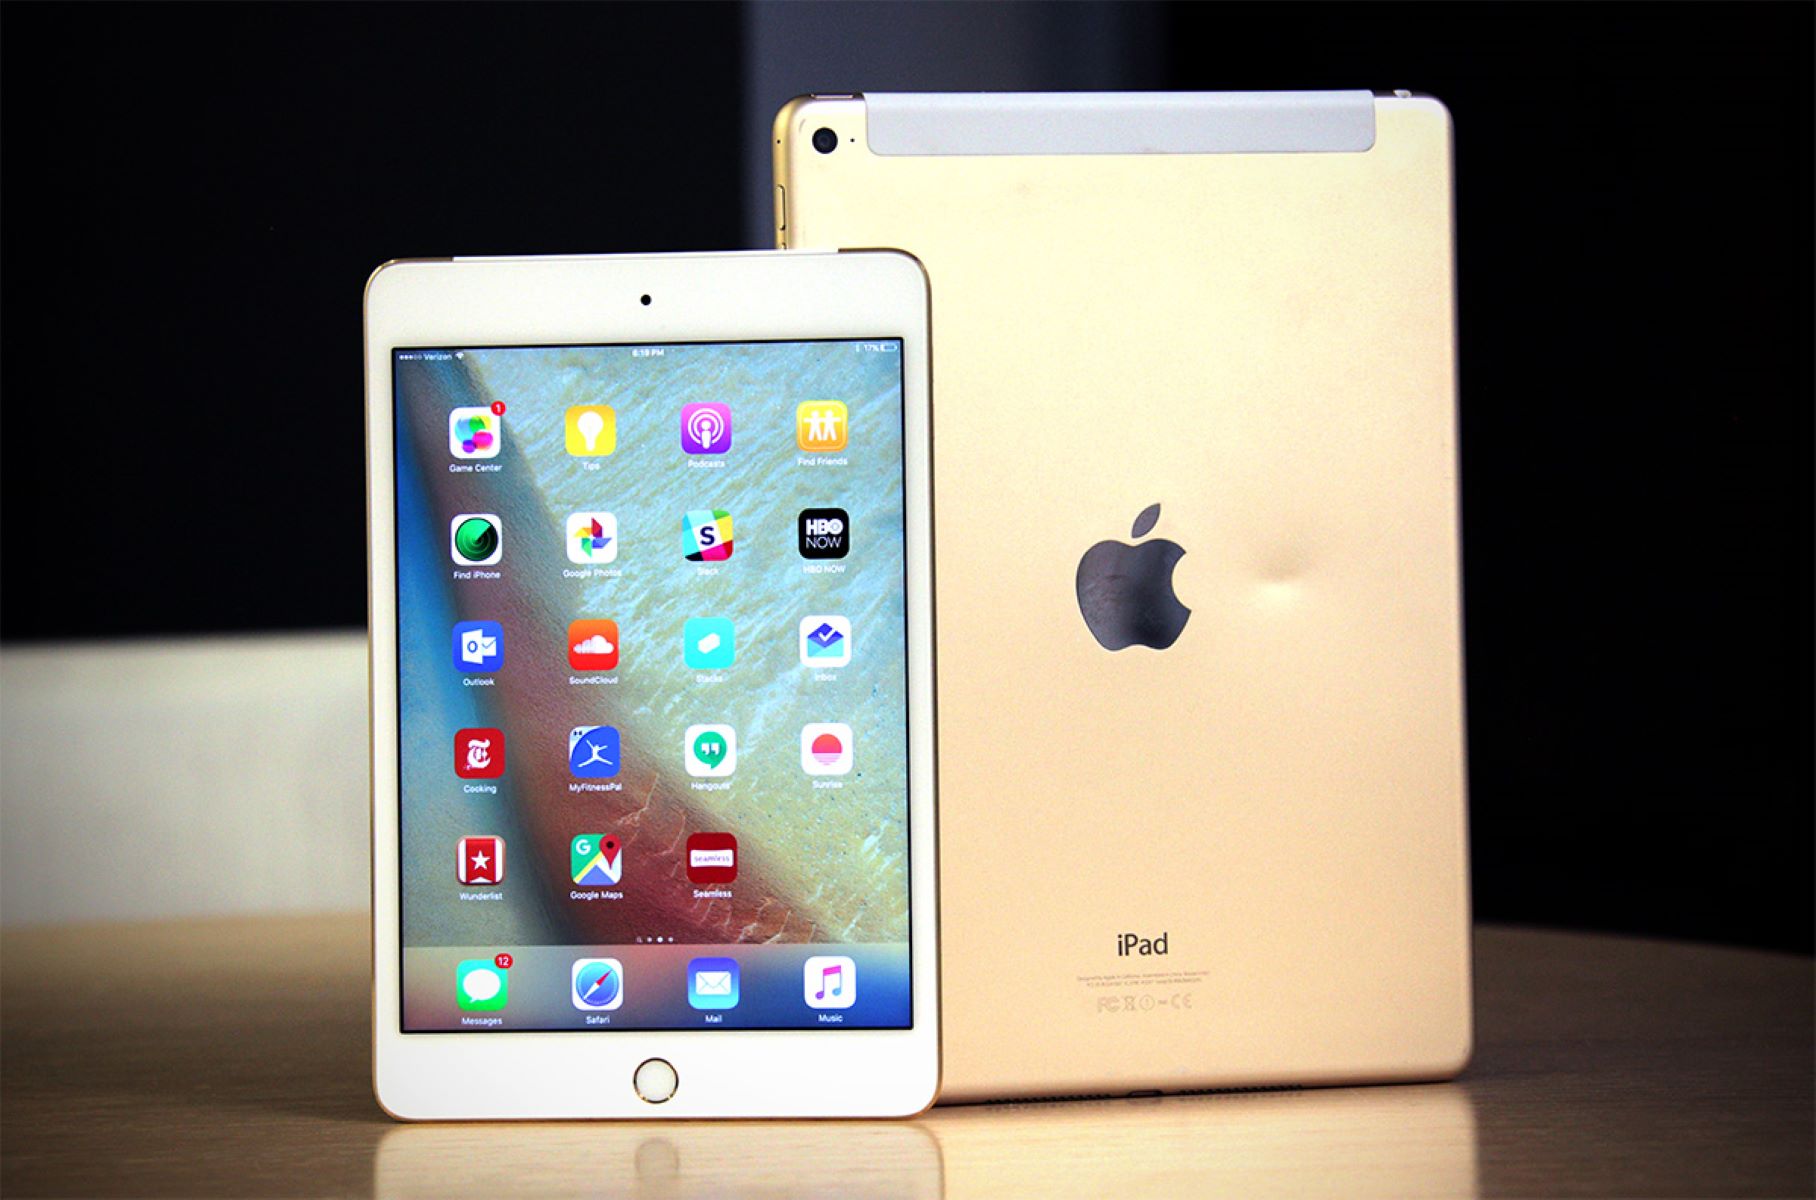 Get The Refurbished IPad Mini 4 For Only $230